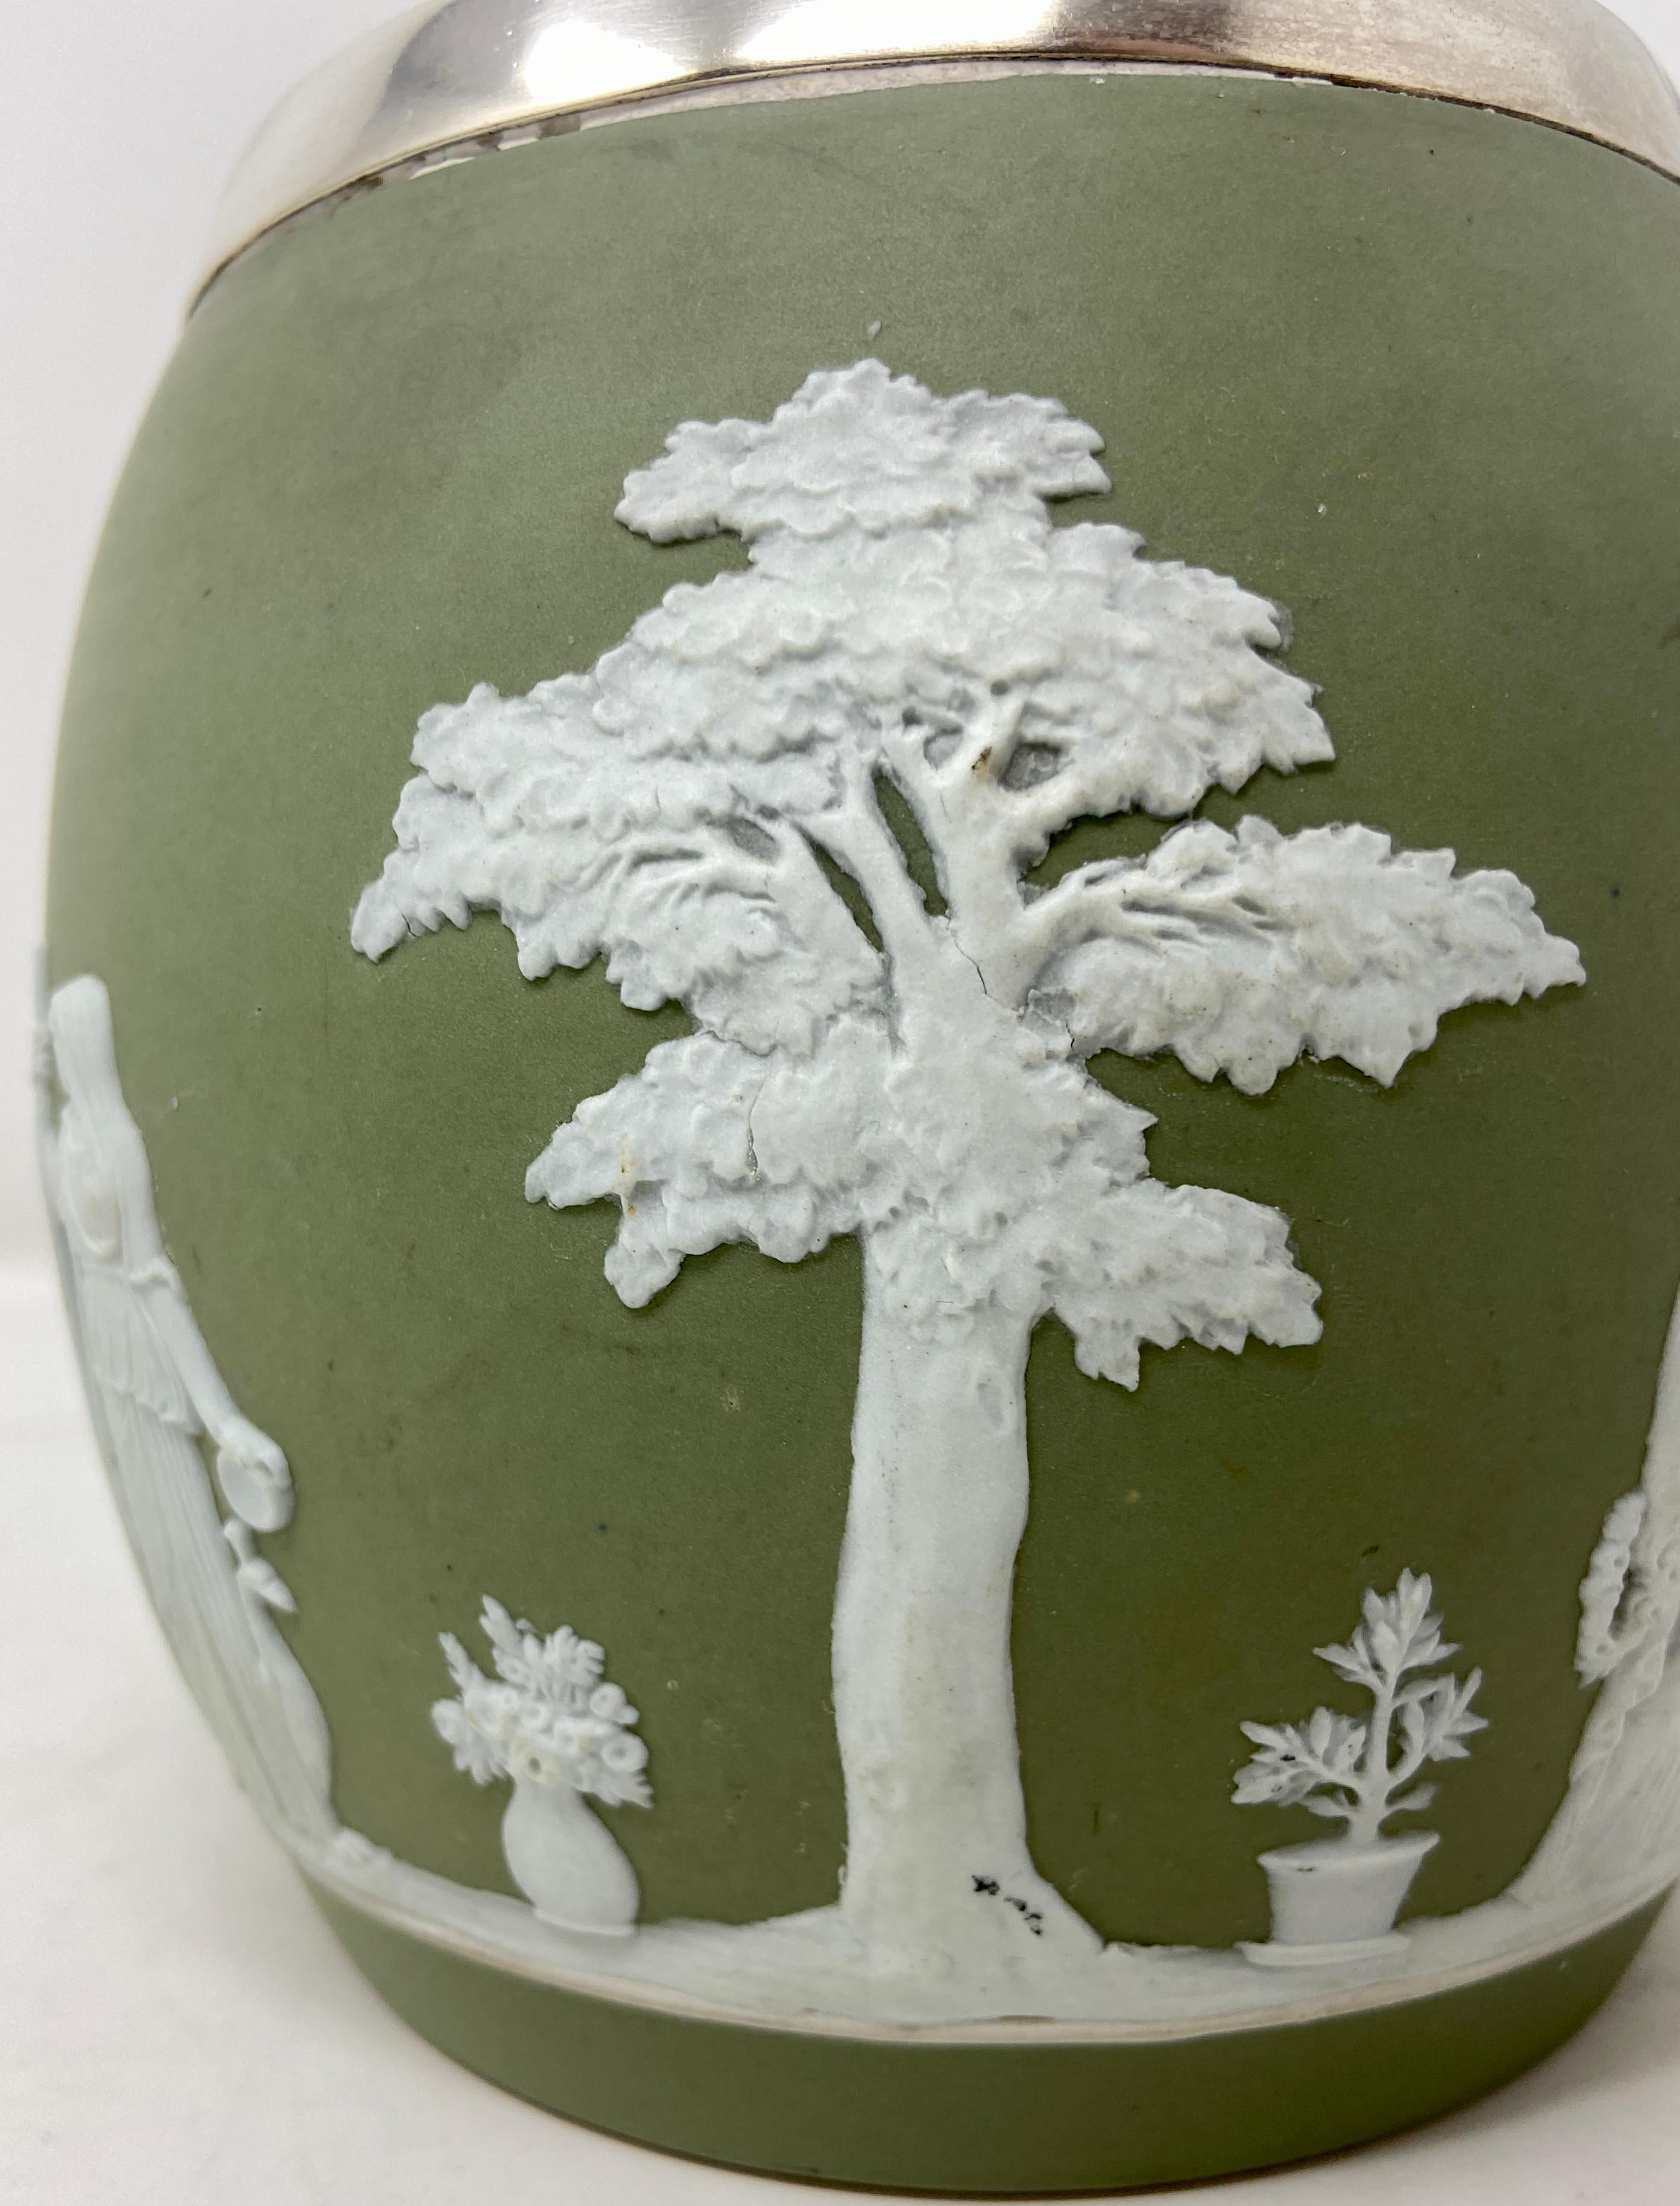 Antique English Wedgwood Porcelain Biscuit Barrel, Circa 1890-1910 In Good Condition For Sale In New Orleans, LA